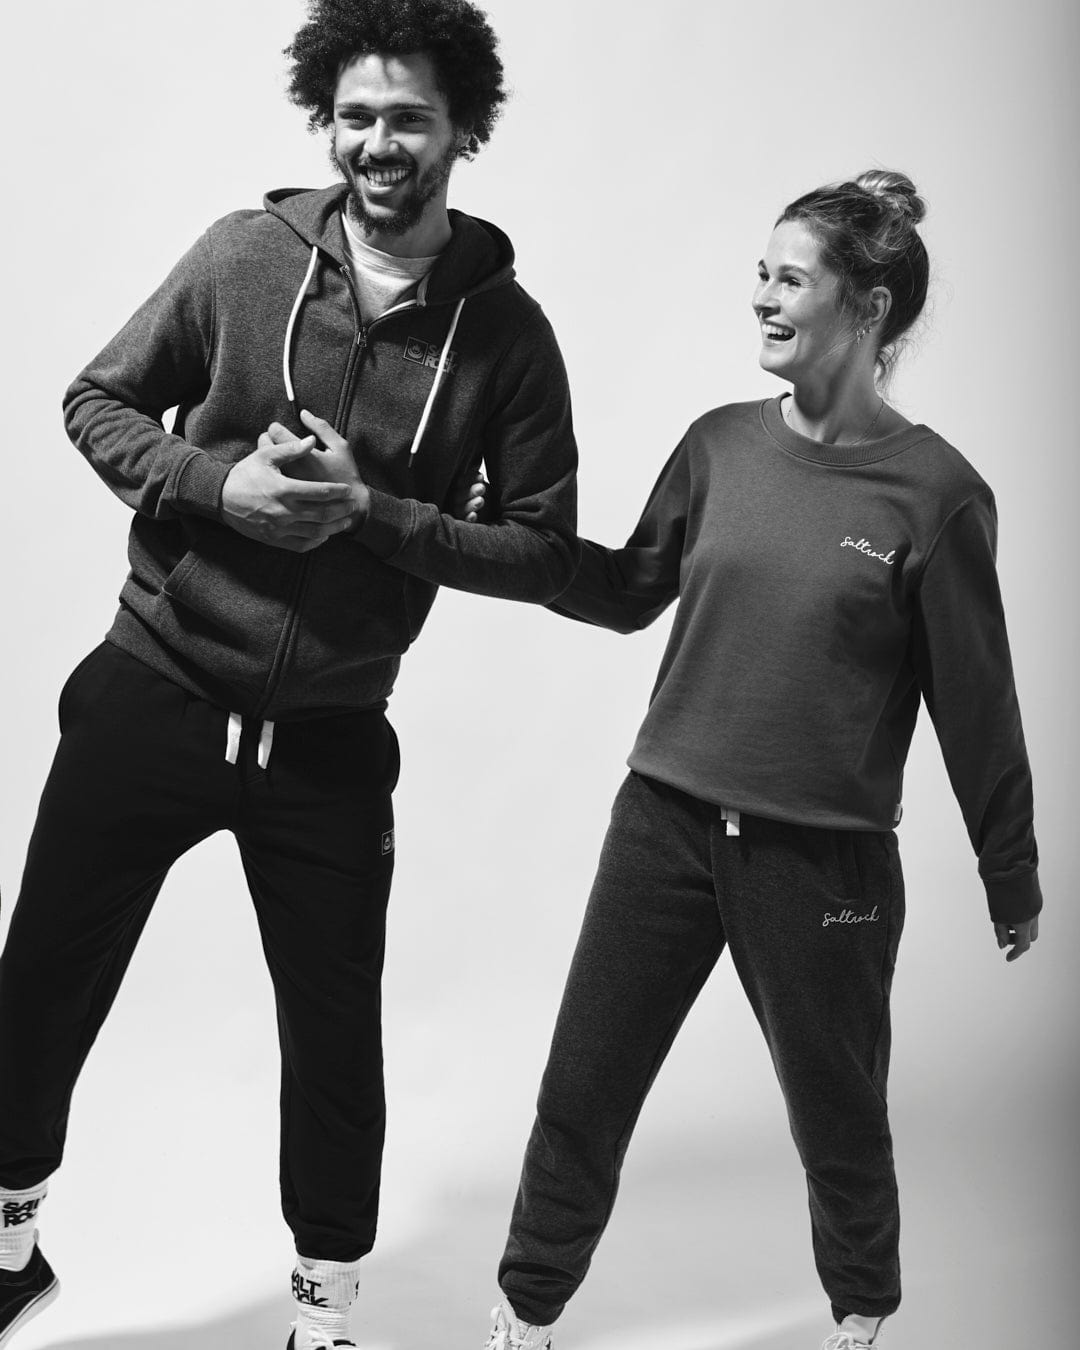 A black and white photo of a man and woman posing for a photo, both wearing Saltrock Original - Mens Zip Hood - Blue Marl tops with Saltrock branding.